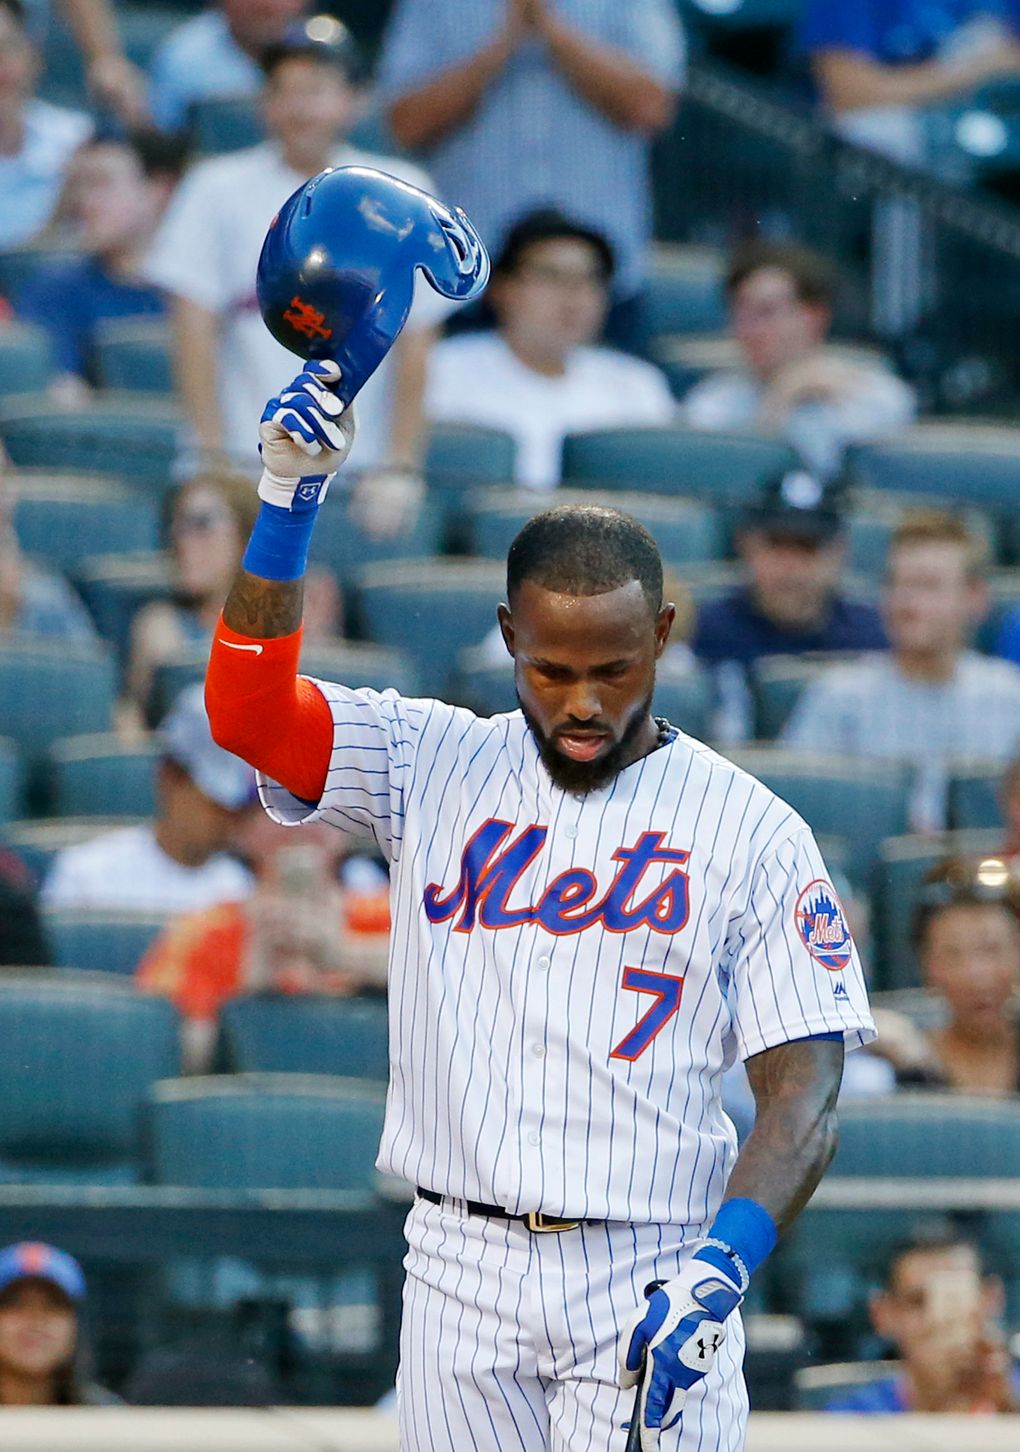 Mets SS Jose Reyes to come off DL on Tuesday - The San Diego Union-Tribune